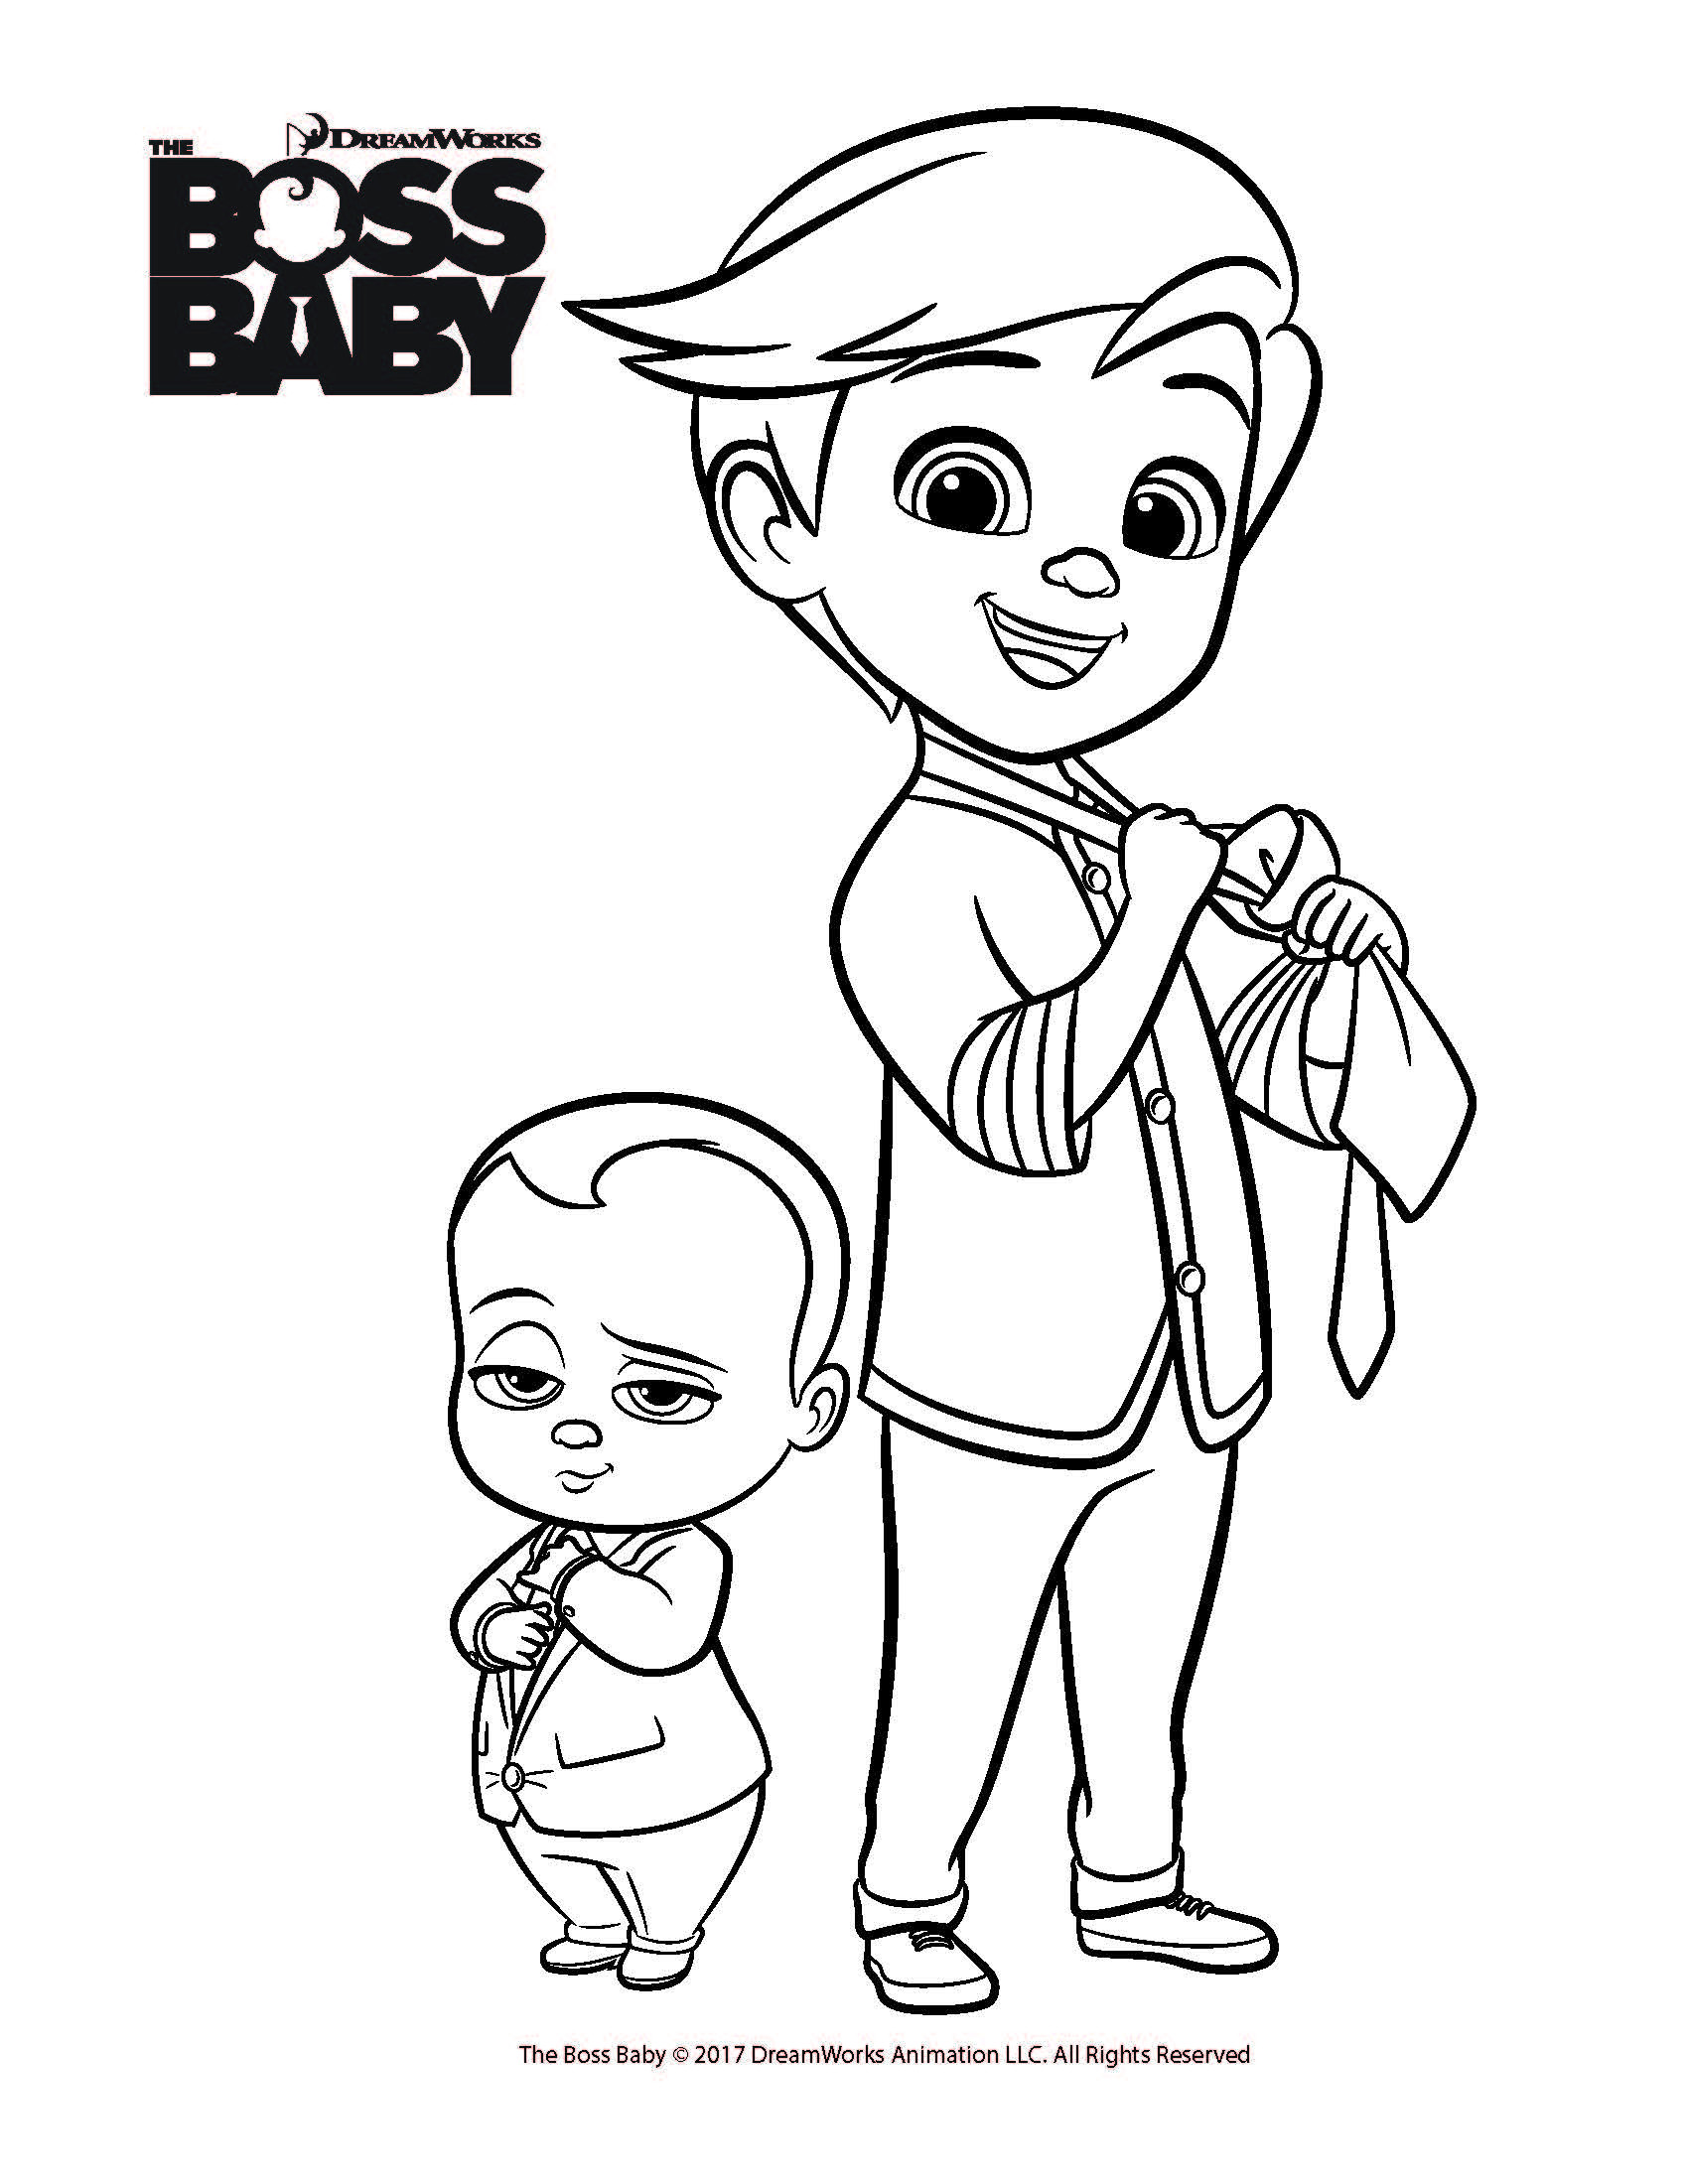 Baby Coloring Pages To Print
 Free coloring printables for The Boss Baby from Dreamworks